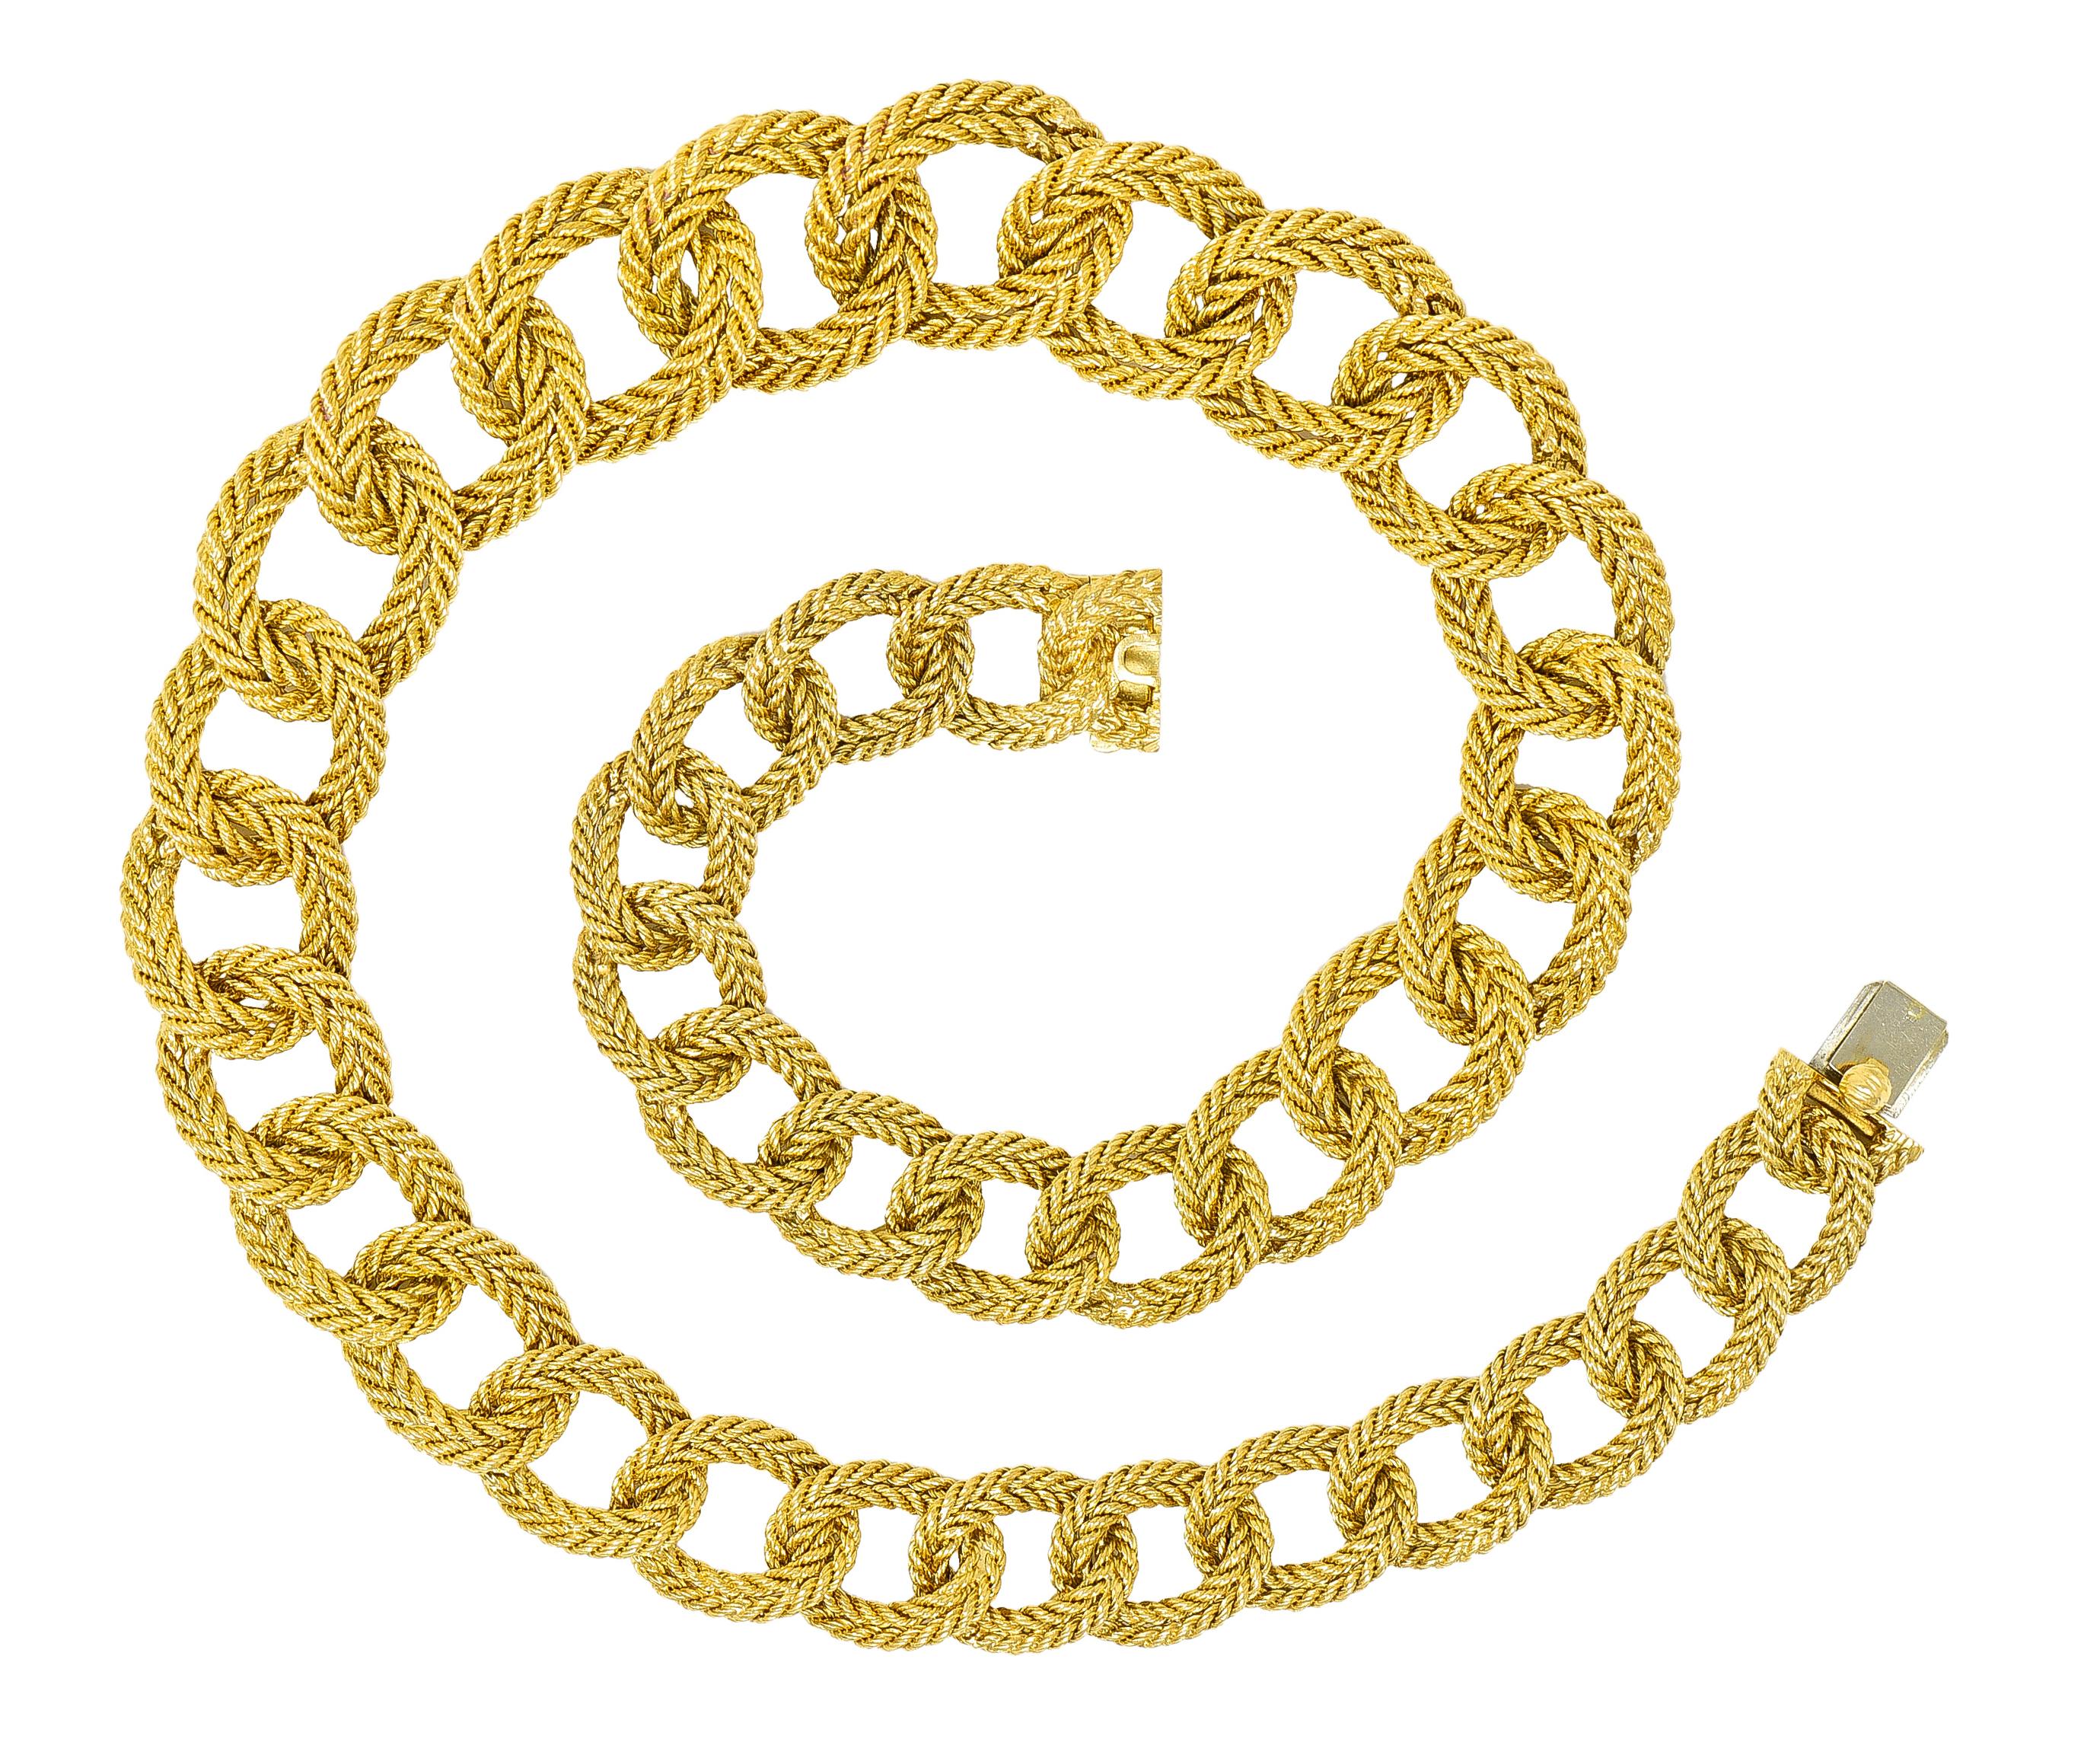 Designed as a curb chain necklace with links graduating in size. Featuring twisted rope motif throughout. Completed by hidden clasp closure with hinged safety. Stamped 750 with French assay marks for 18 karat gold. Numbered and fully signed Tiffany